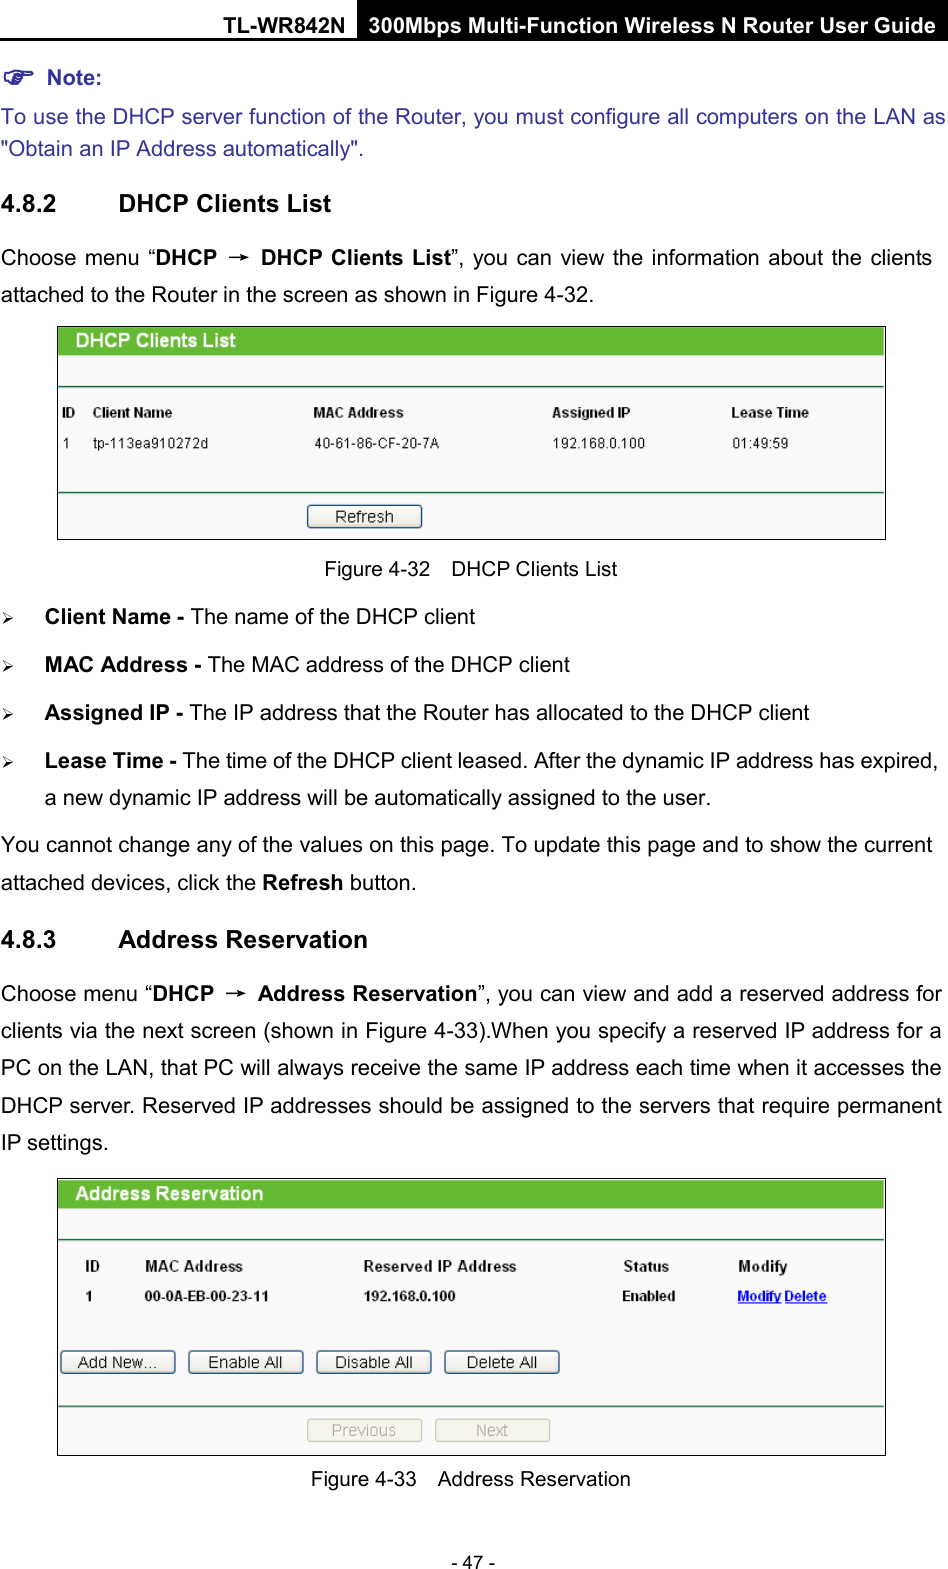 TL-WR842N 300Mbps Multi-Function Wireless N Router User Guide  - 47 -  Note: To use the DHCP server function of the Router, you must configure all computers on the LAN as &quot;Obtain an IP Address automatically&quot;. 4.8.2 DHCP Clients List Choose menu “DHCP → DHCP Clients List”, you can view the information about the clients attached to the Router in the screen as shown in Figure 4-32.  Figure 4-32  DHCP Clients List  Client Name - The name of the DHCP client    MAC Address - The MAC address of the DHCP client    Assigned IP - The IP address that the Router has allocated to the DHCP client  Lease Time - The time of the DHCP client leased. After the dynamic IP address has expired, a new dynamic IP address will be automatically assigned to the user.     You cannot change any of the values on this page. To update this page and to show the current attached devices, click the Refresh button. 4.8.3 Address Reservation Choose menu “DHCP → Address Reservation”, you can view and add a reserved address for clients via the next screen (shown in Figure 4-33).When you specify a reserved IP address for a PC on the LAN, that PC will always receive the same IP address each time when it accesses the DHCP server. Reserved IP addresses should be assigned to the servers that require permanent IP settings.    Figure 4-33  Address Reservation 